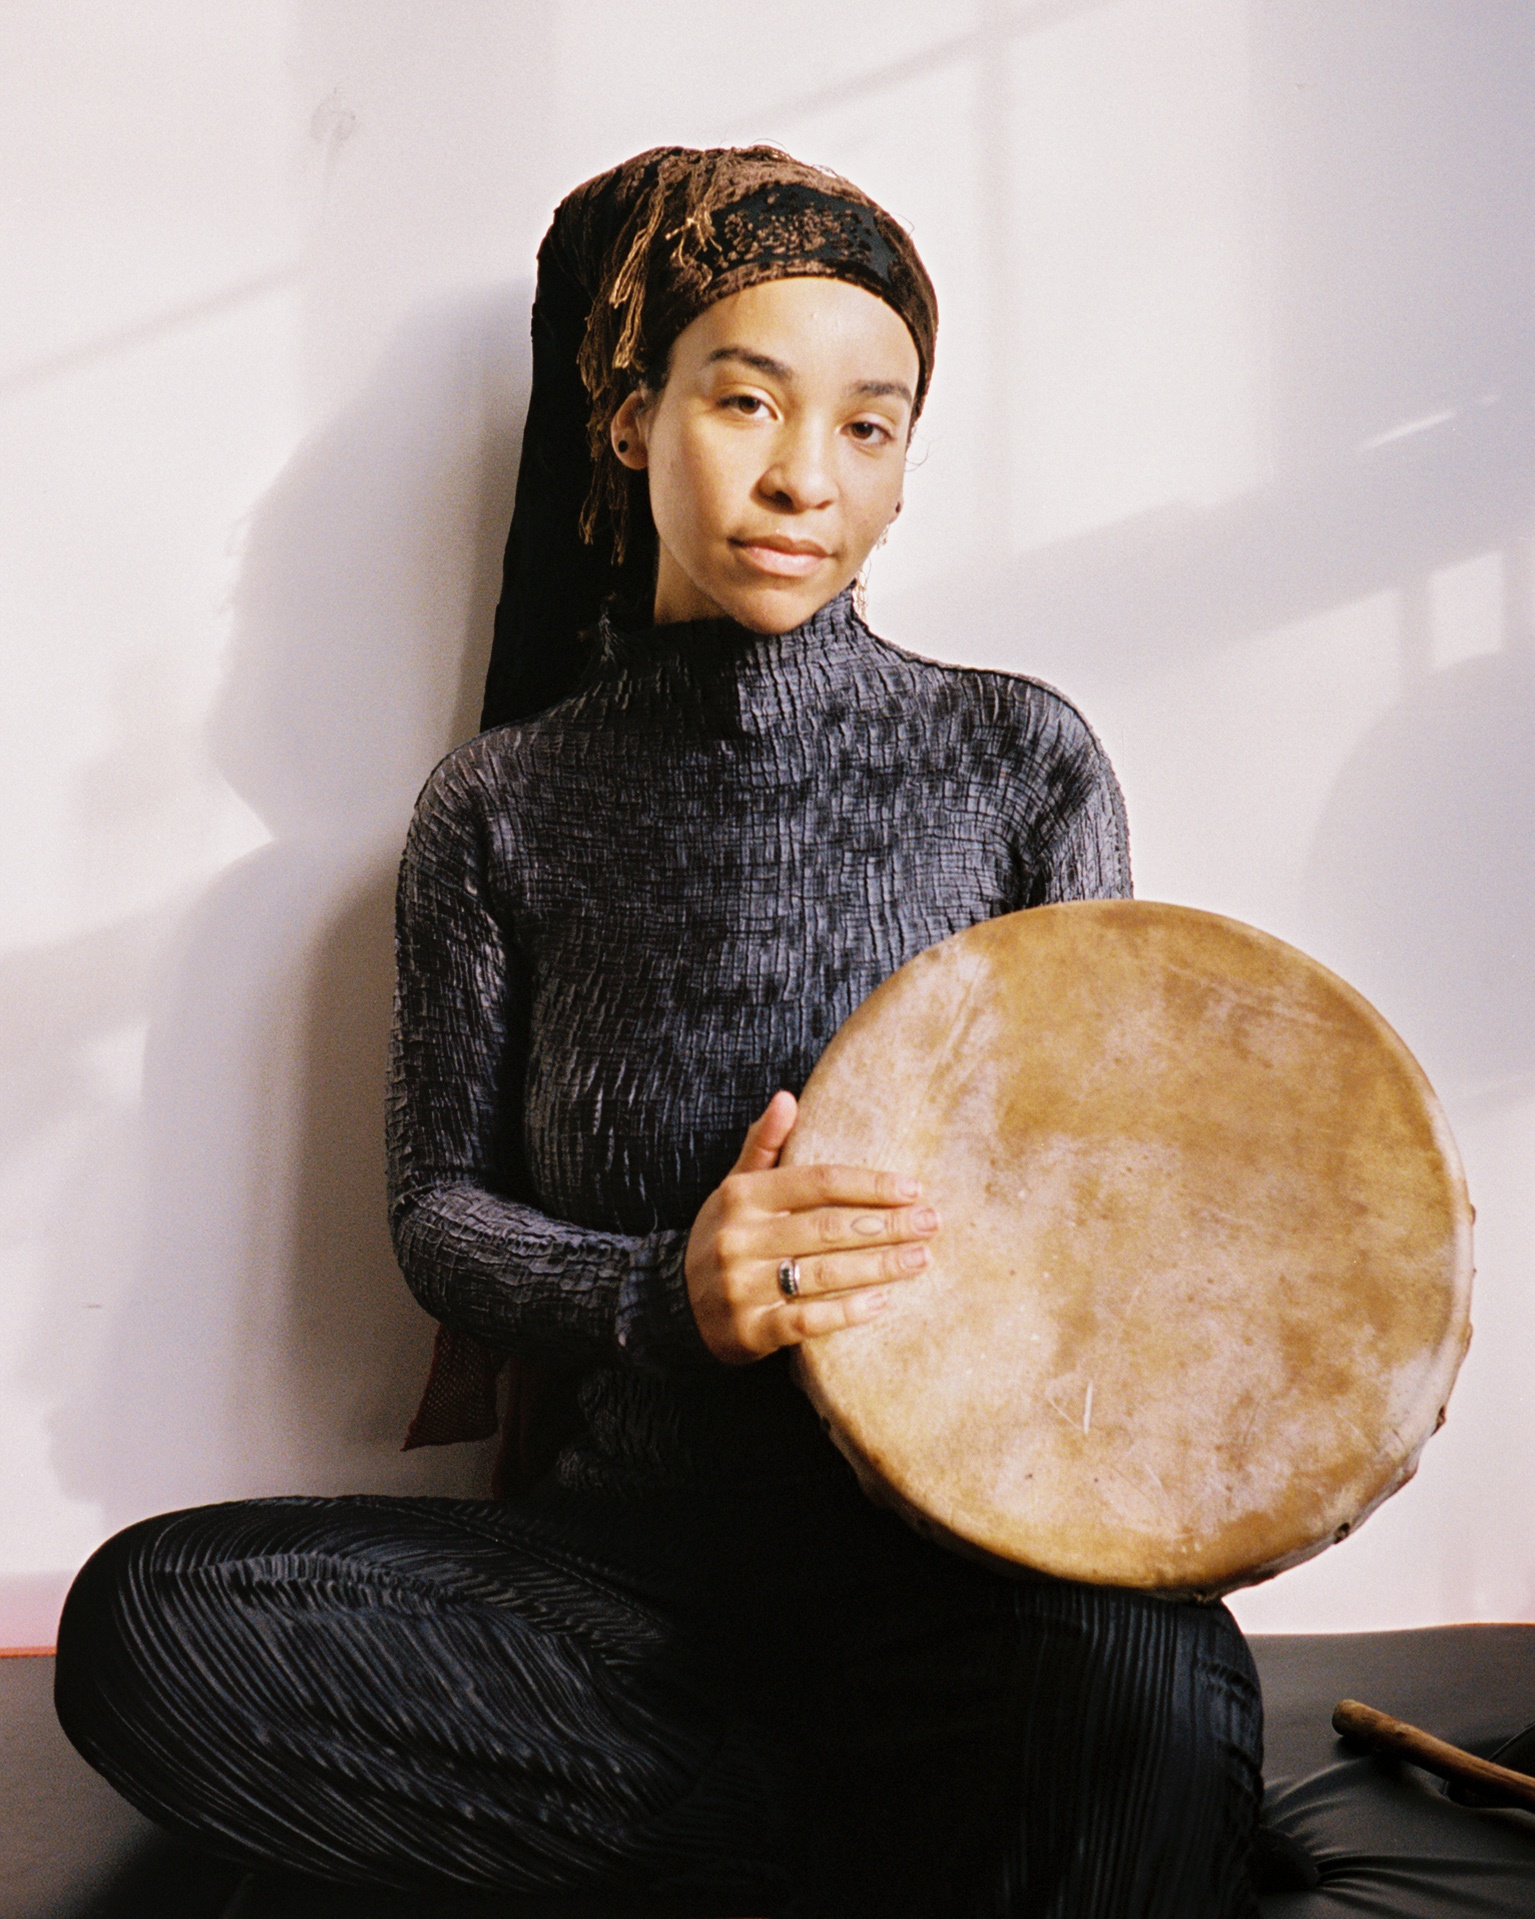 A photo of the artist AnAkA. She sits in light and shadow from a window while holding a drum. 